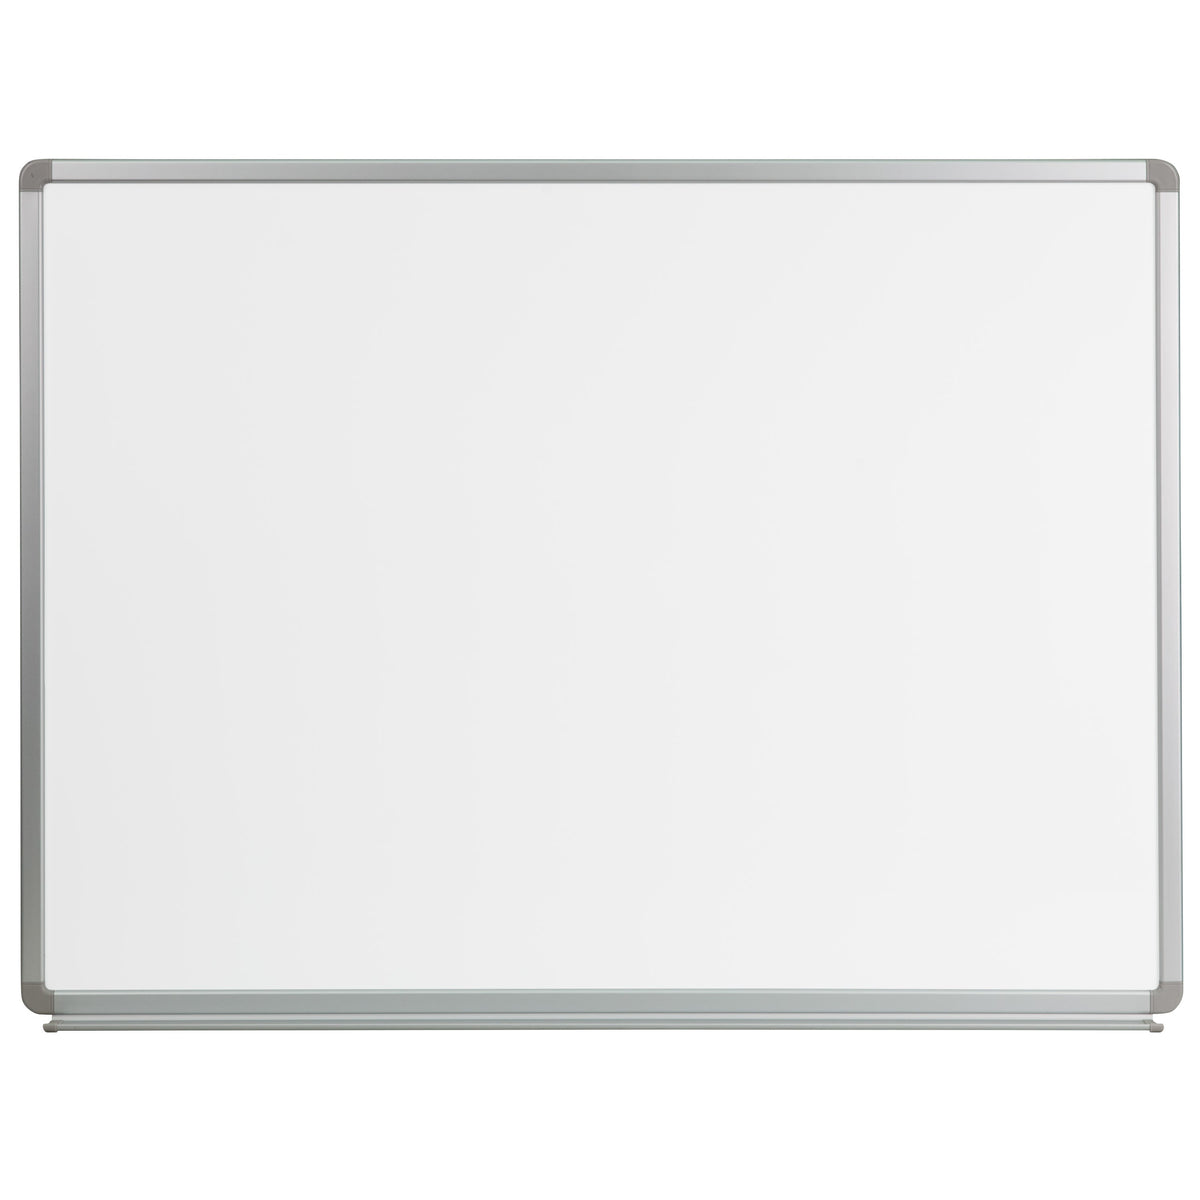 4' W x 3' H Magnetic Marker Board with Galvanized Aluminum Frame